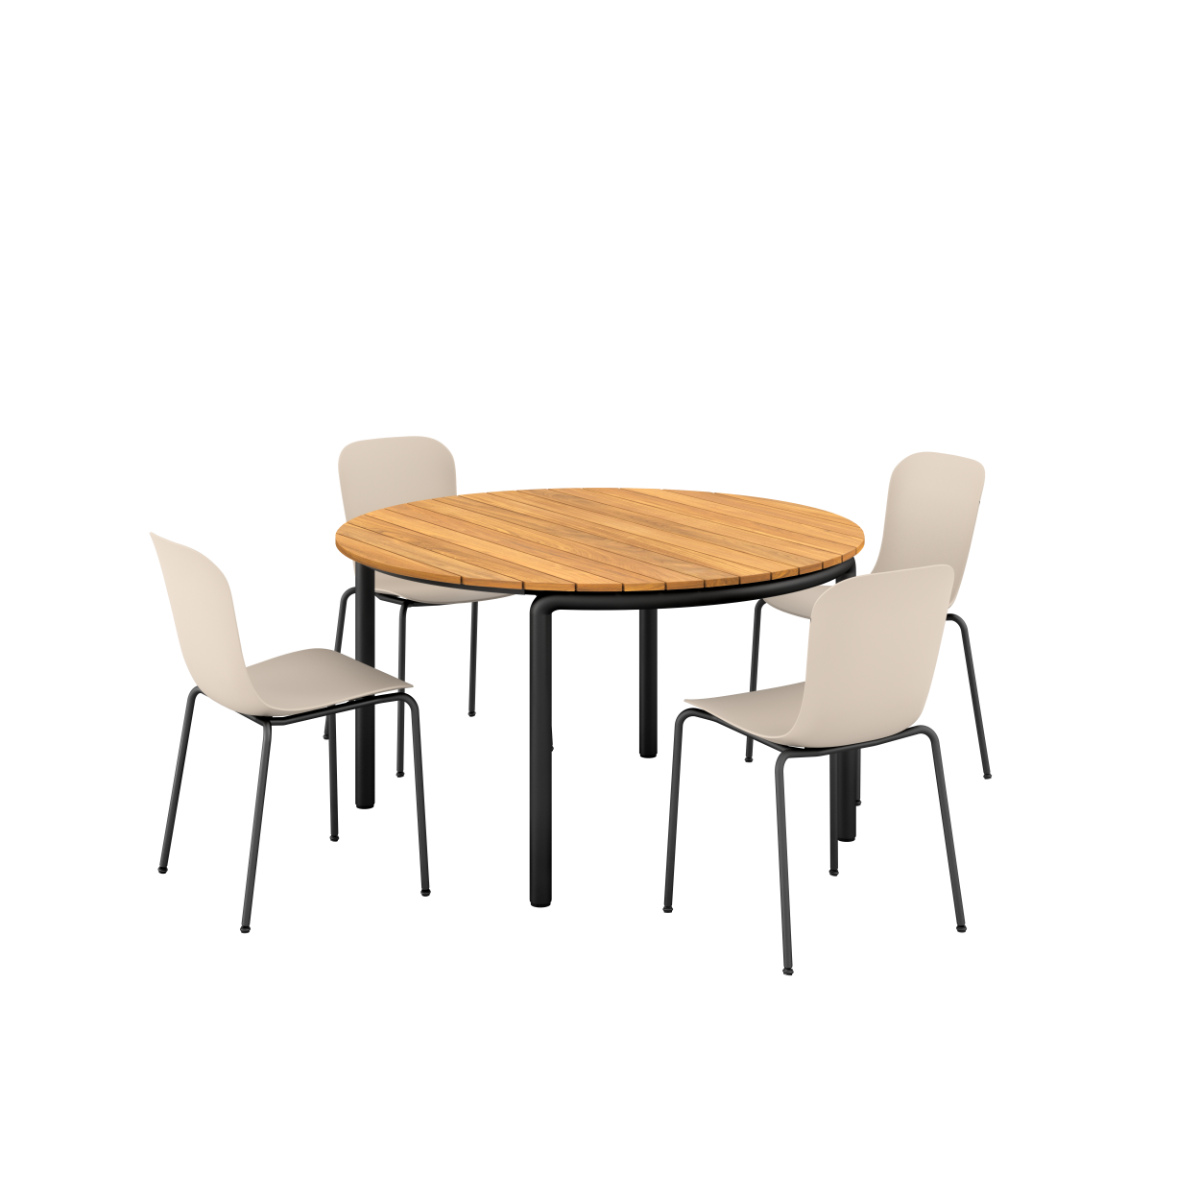 Patio Dining Table Oe133 + Patio Chair No. One S1